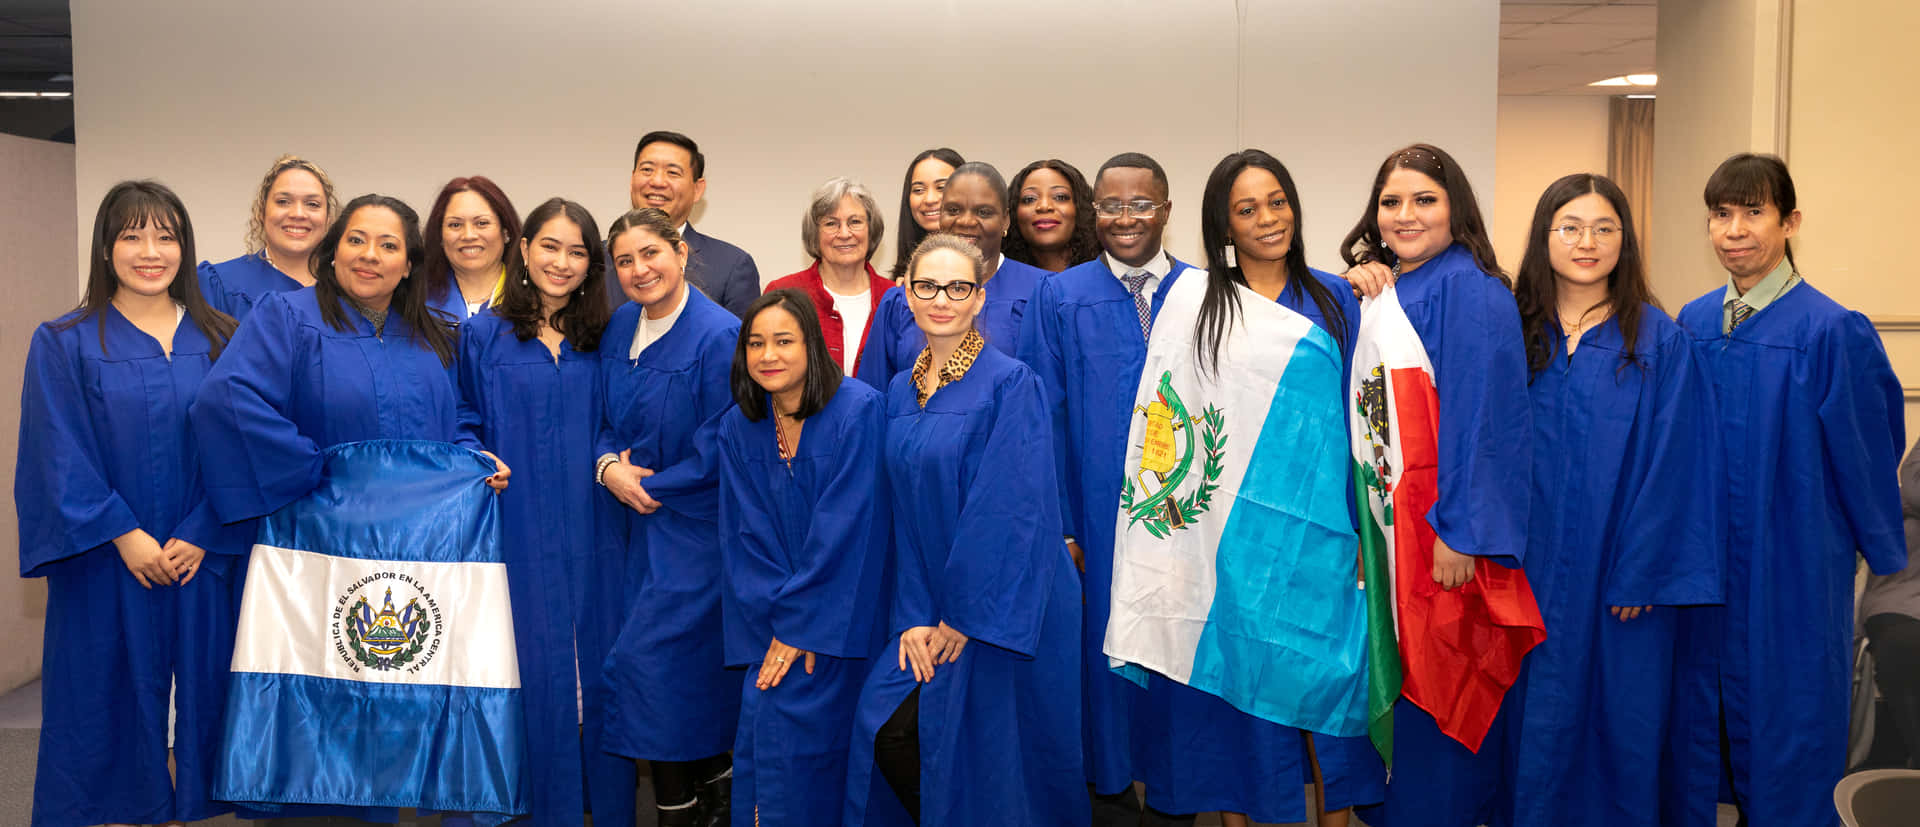 A Group Of People In Blue Graduation Gowns Posing For A Photo